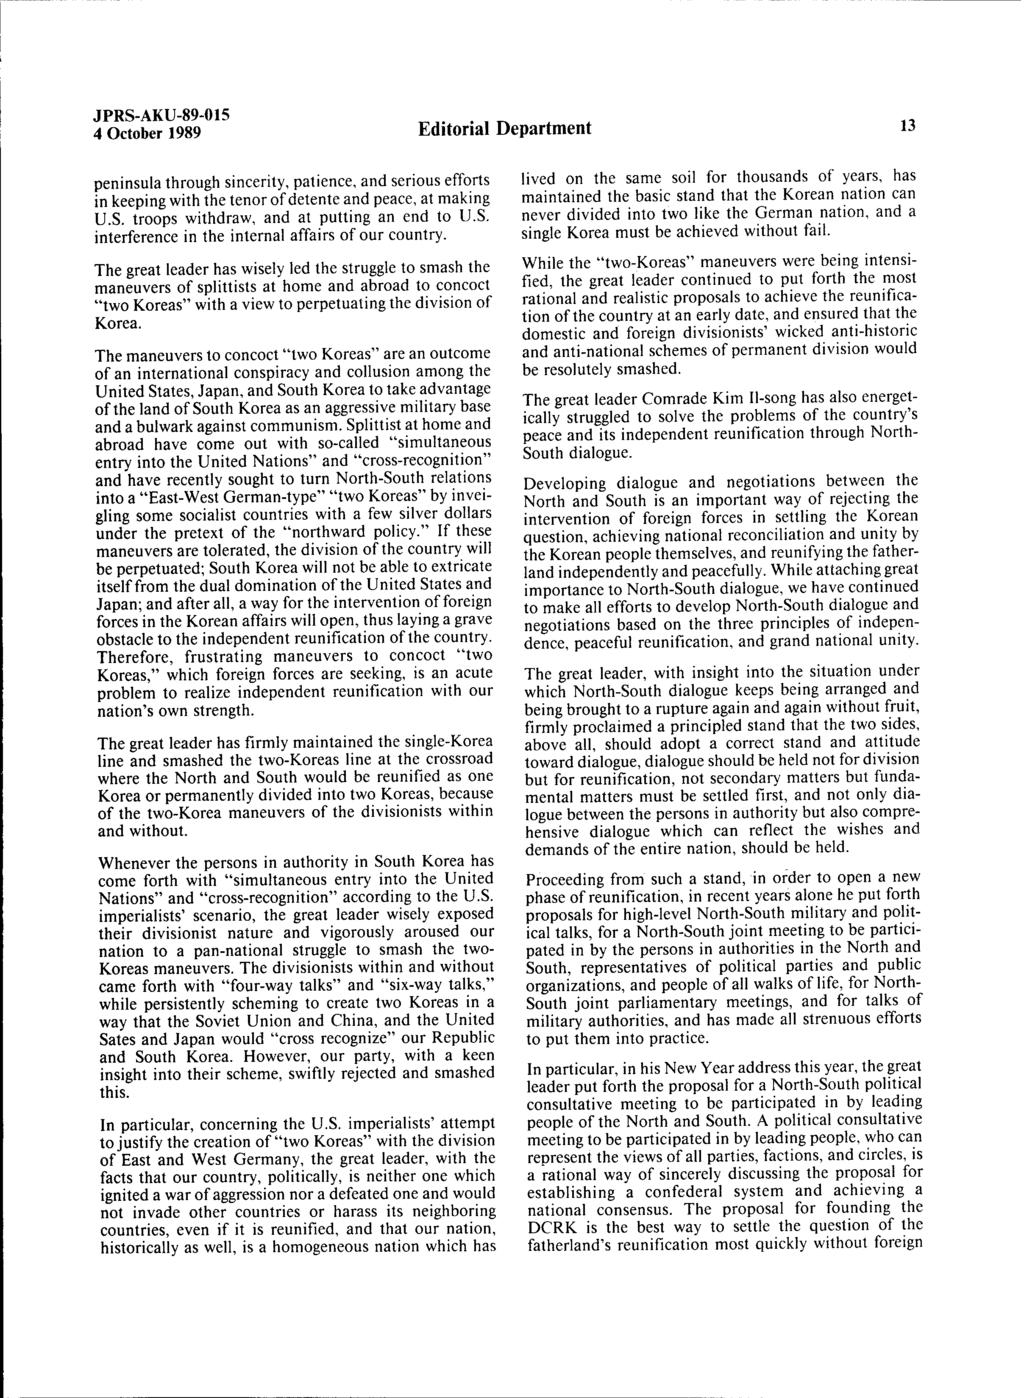 4 October 1989 Editorial Department 13 peninsula through sincerity, patience, and serious efforts in keeping with the tenor of detente and peace, at making U.S.